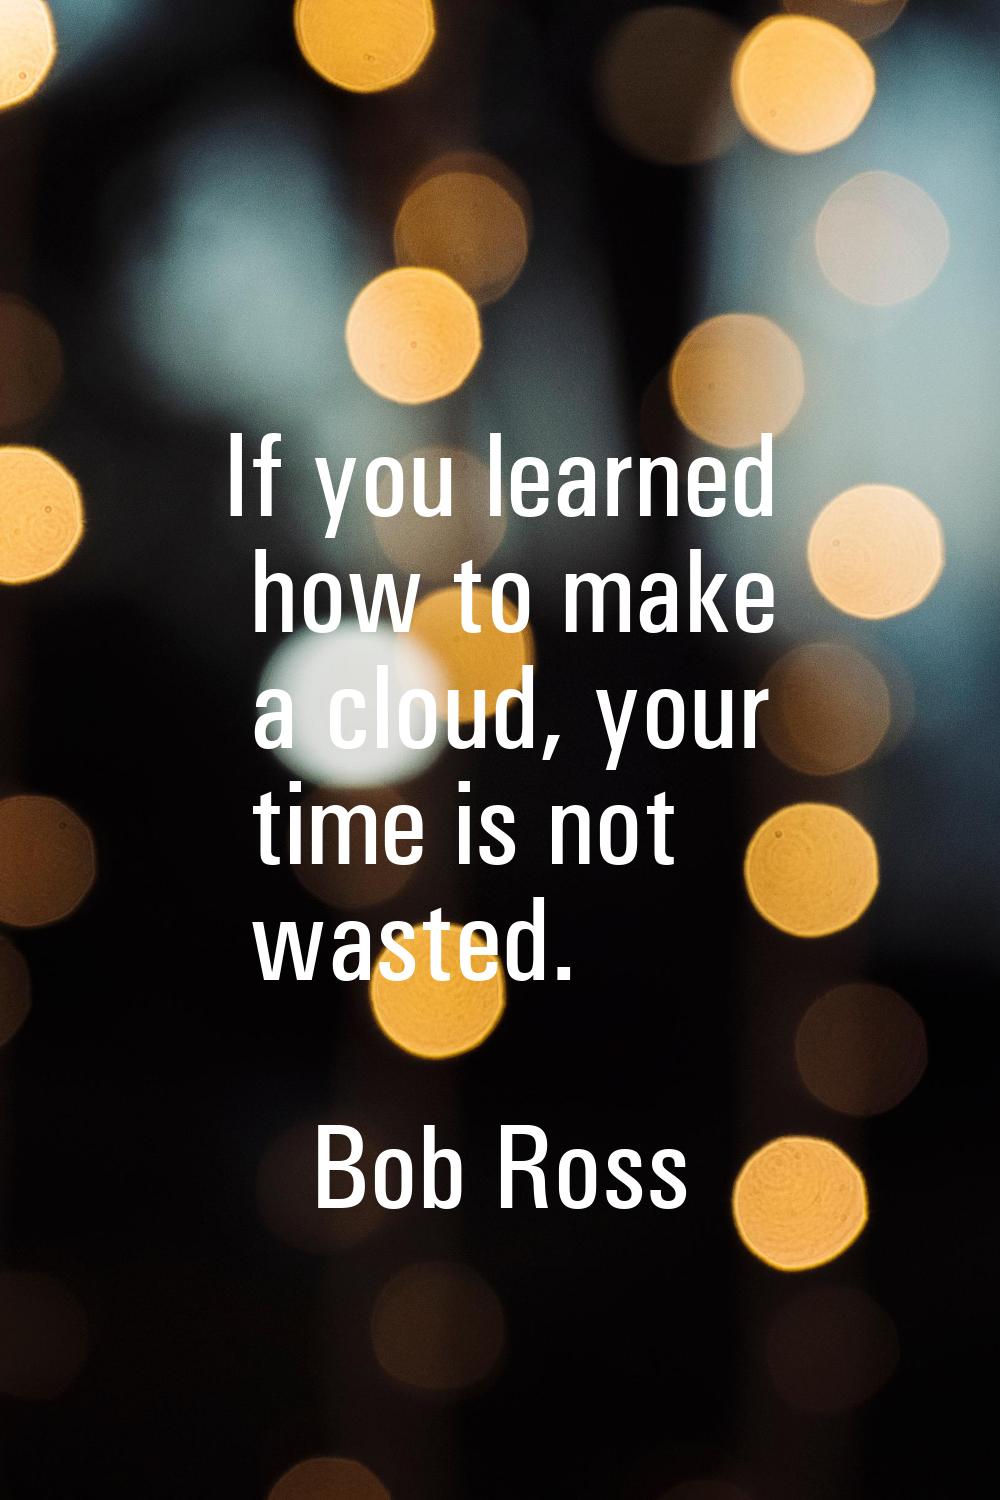 If you learned how to make a cloud, your time is not wasted.